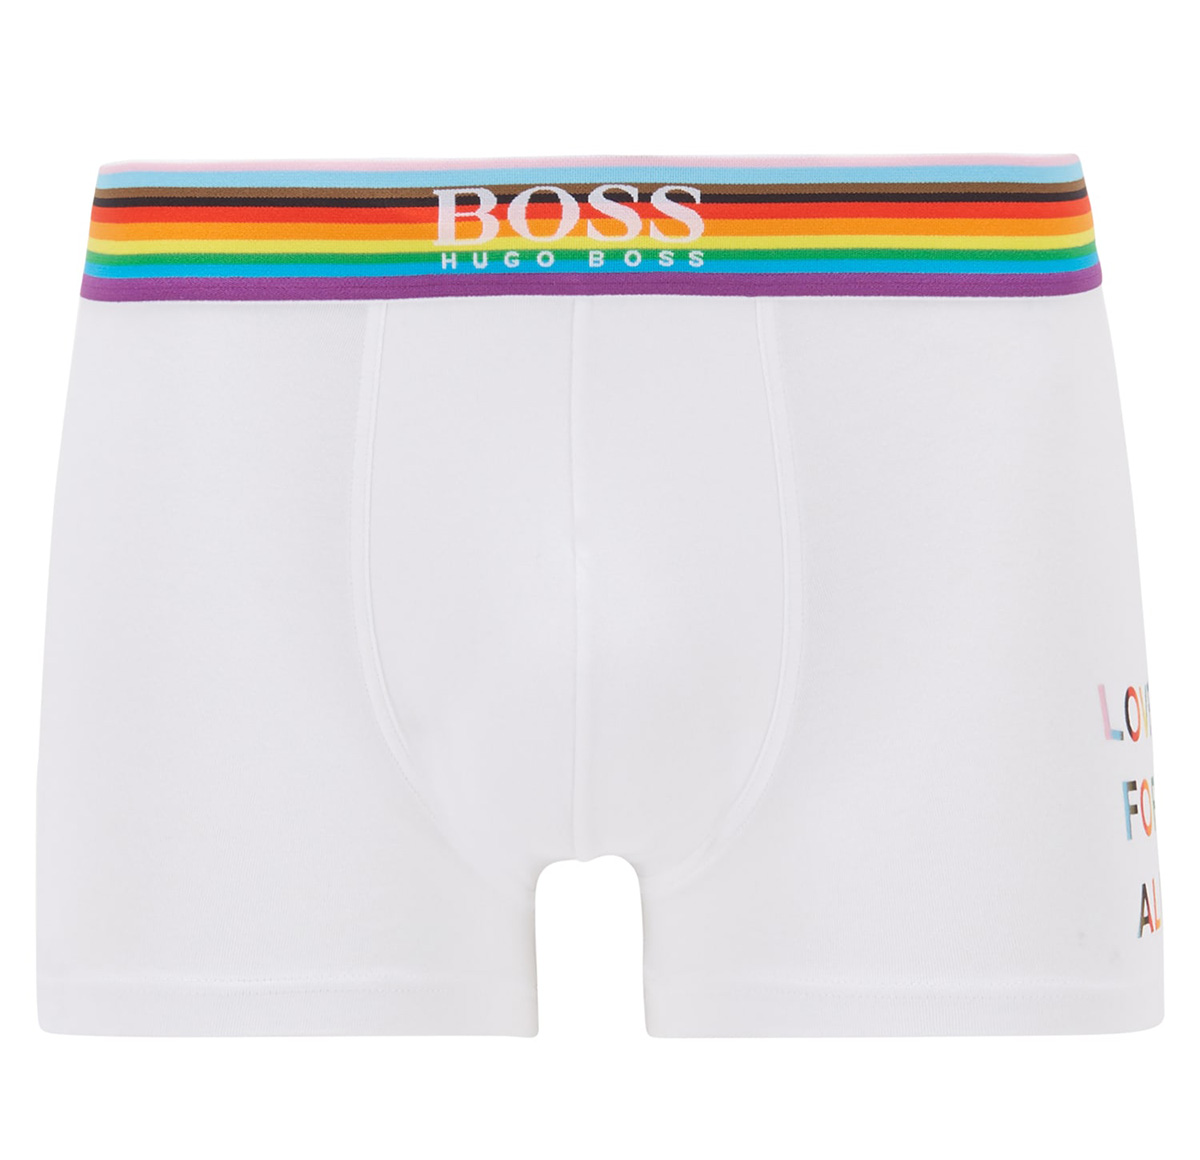 BOSS celebrates Pride Month 2021 with a capsule collection